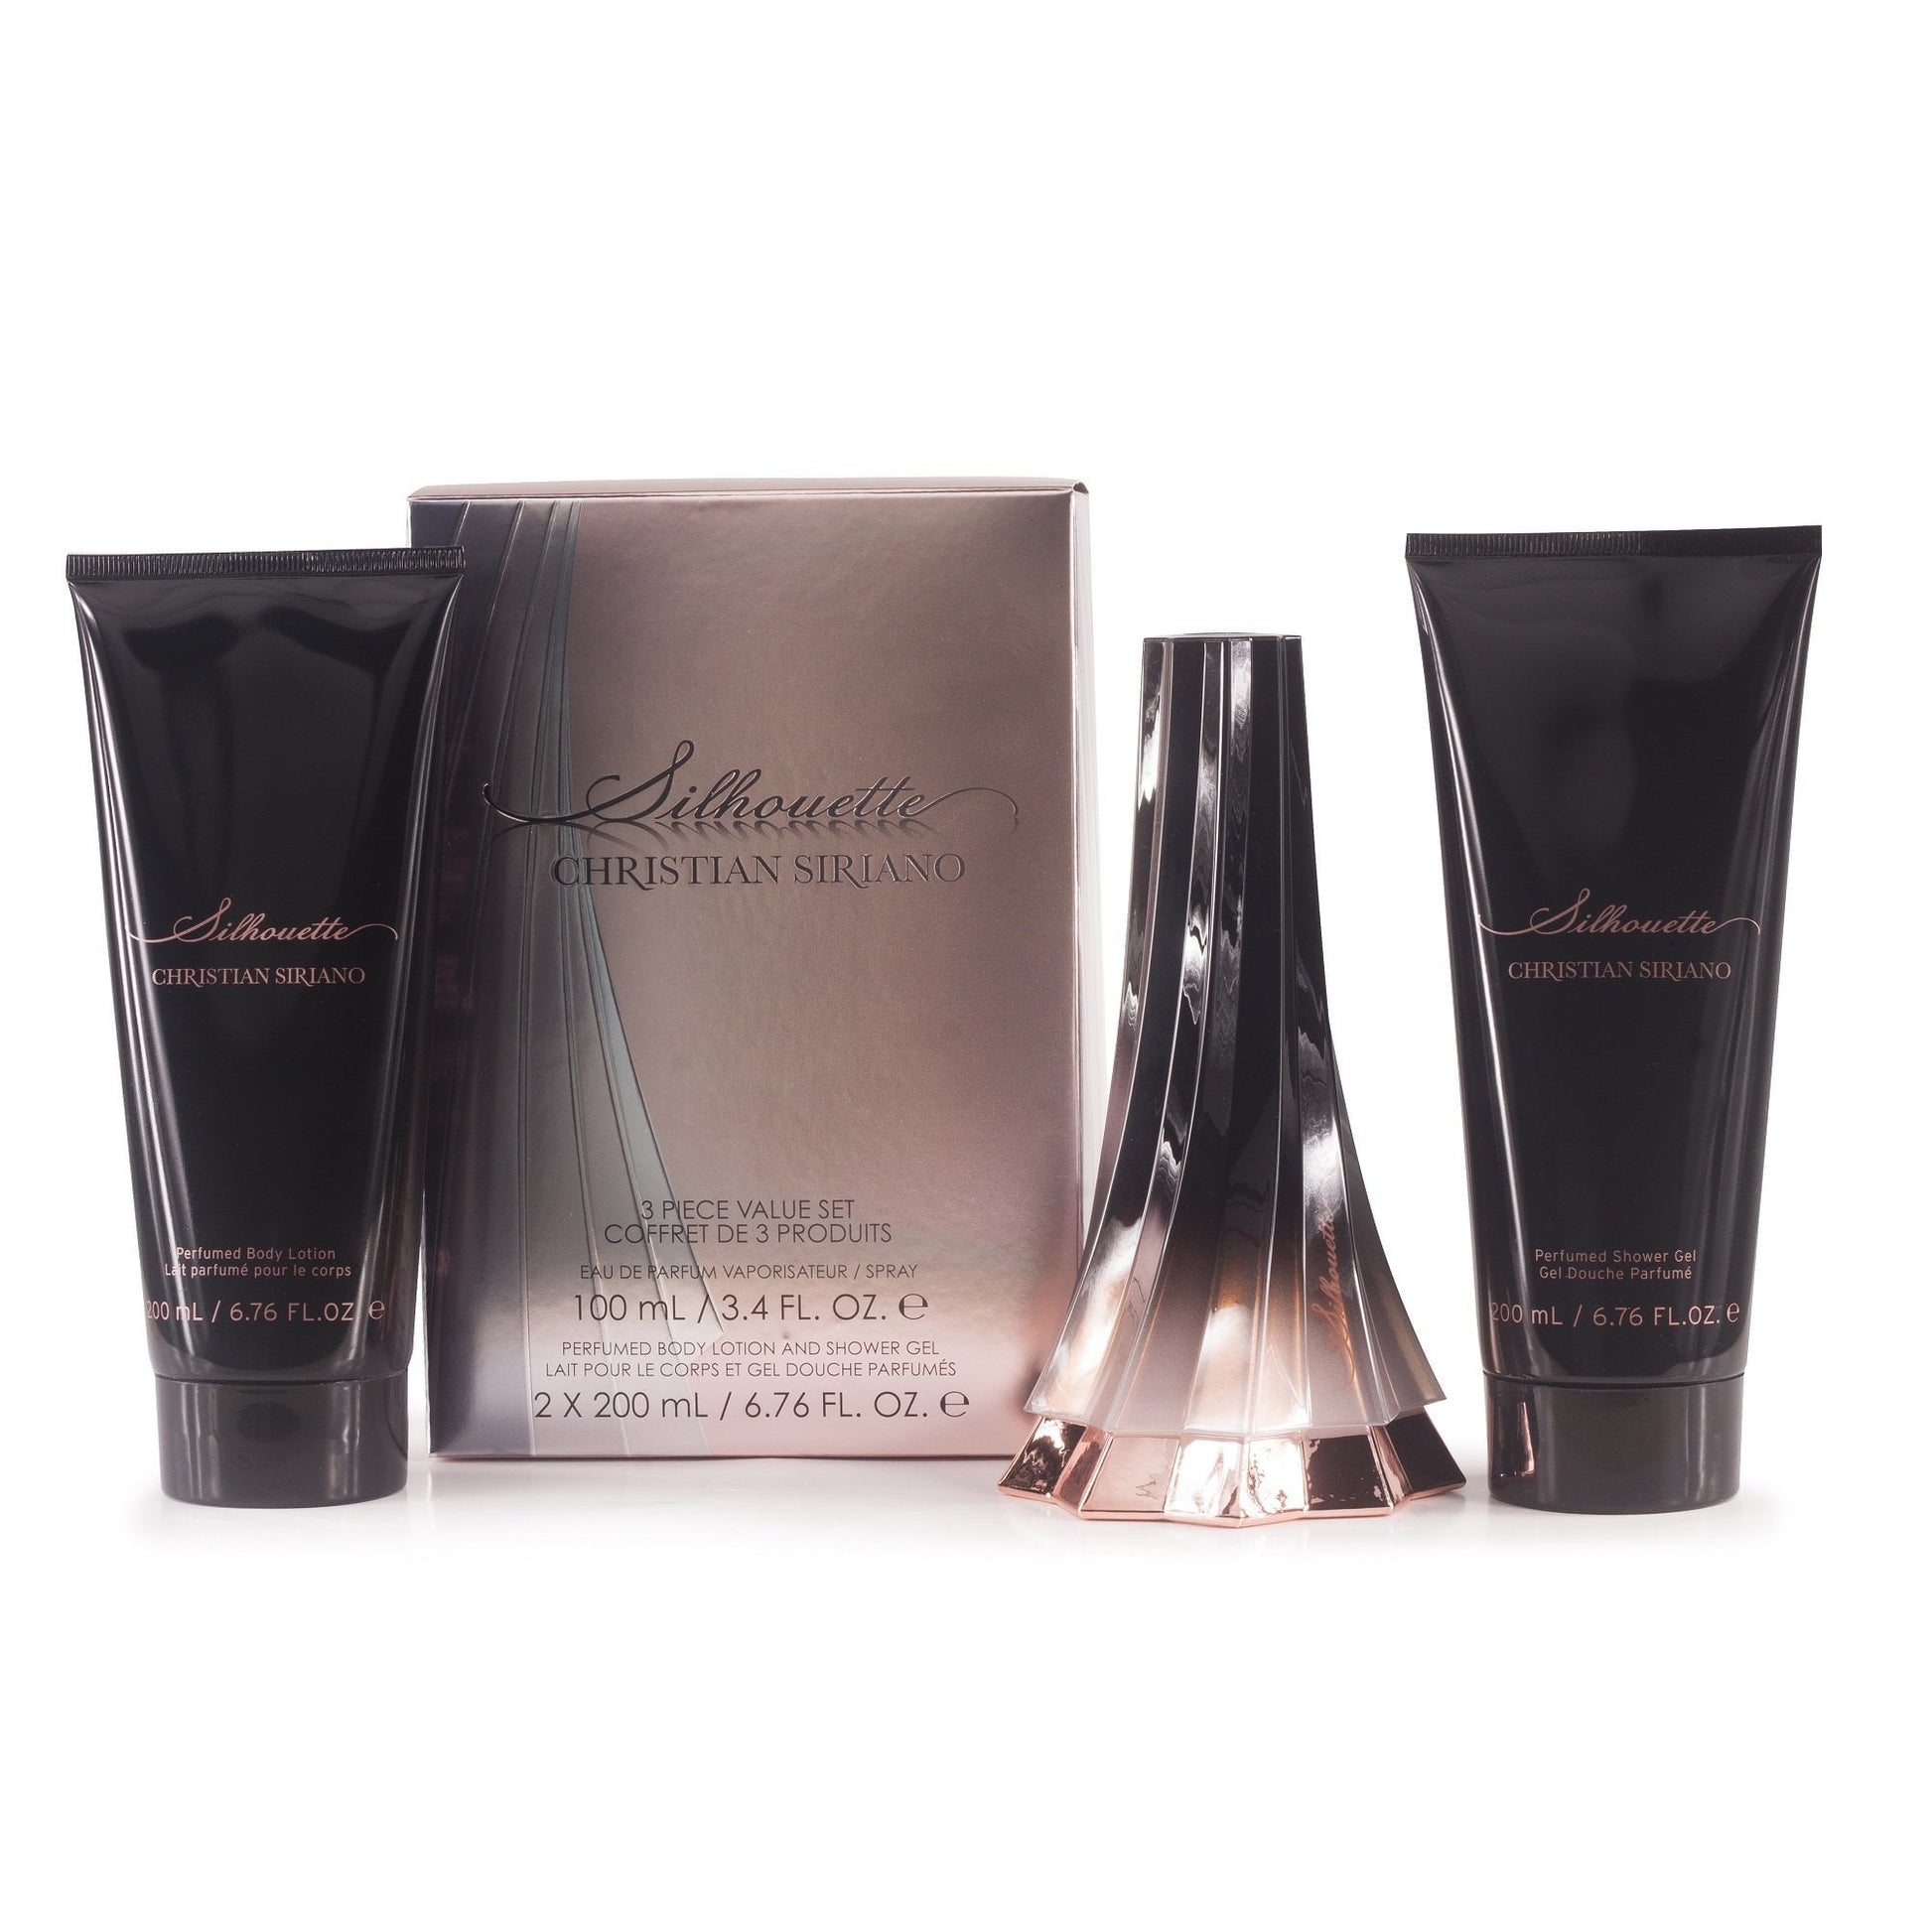 Silhouette Set for Women by Christian Siriano, Product image 2